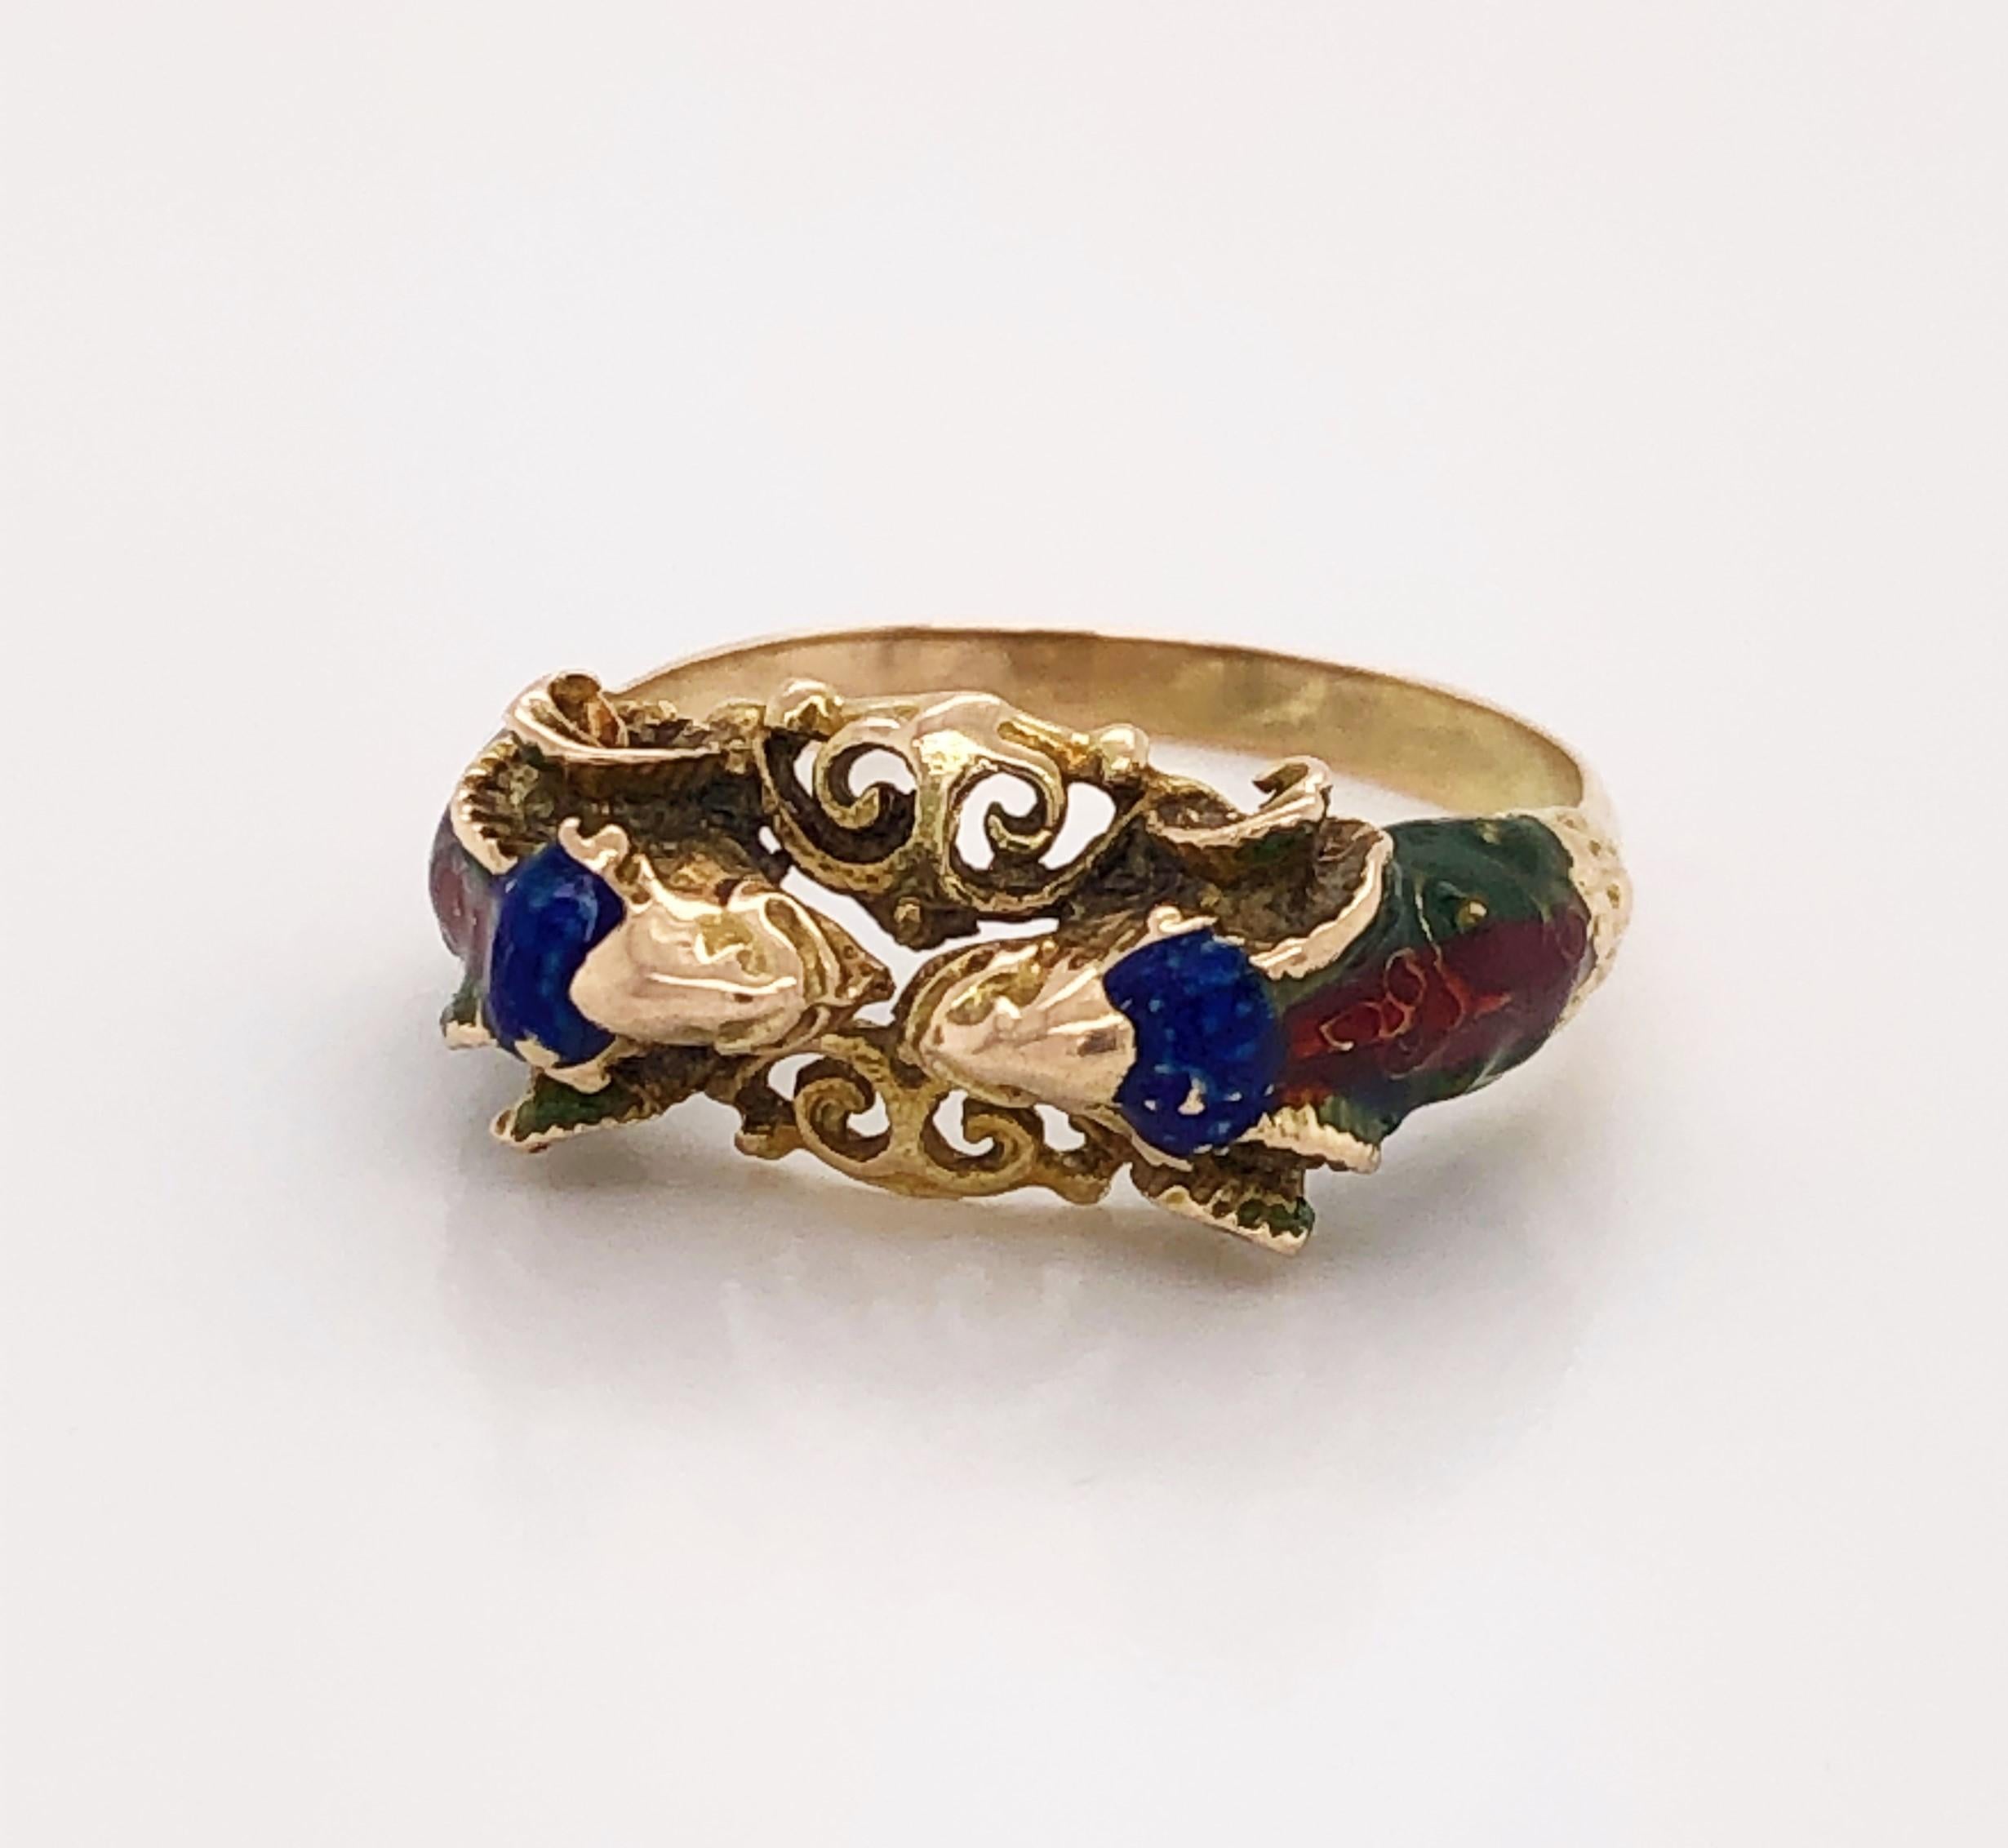 Two dueling rams create this interesting artisan ring in ten carat (10k) yellow gold. Bucking heads meet over center filigree and are hand painted with green, red and blue enamel accents. Unsigned. Band style in size 8-1/2 . in gift box.